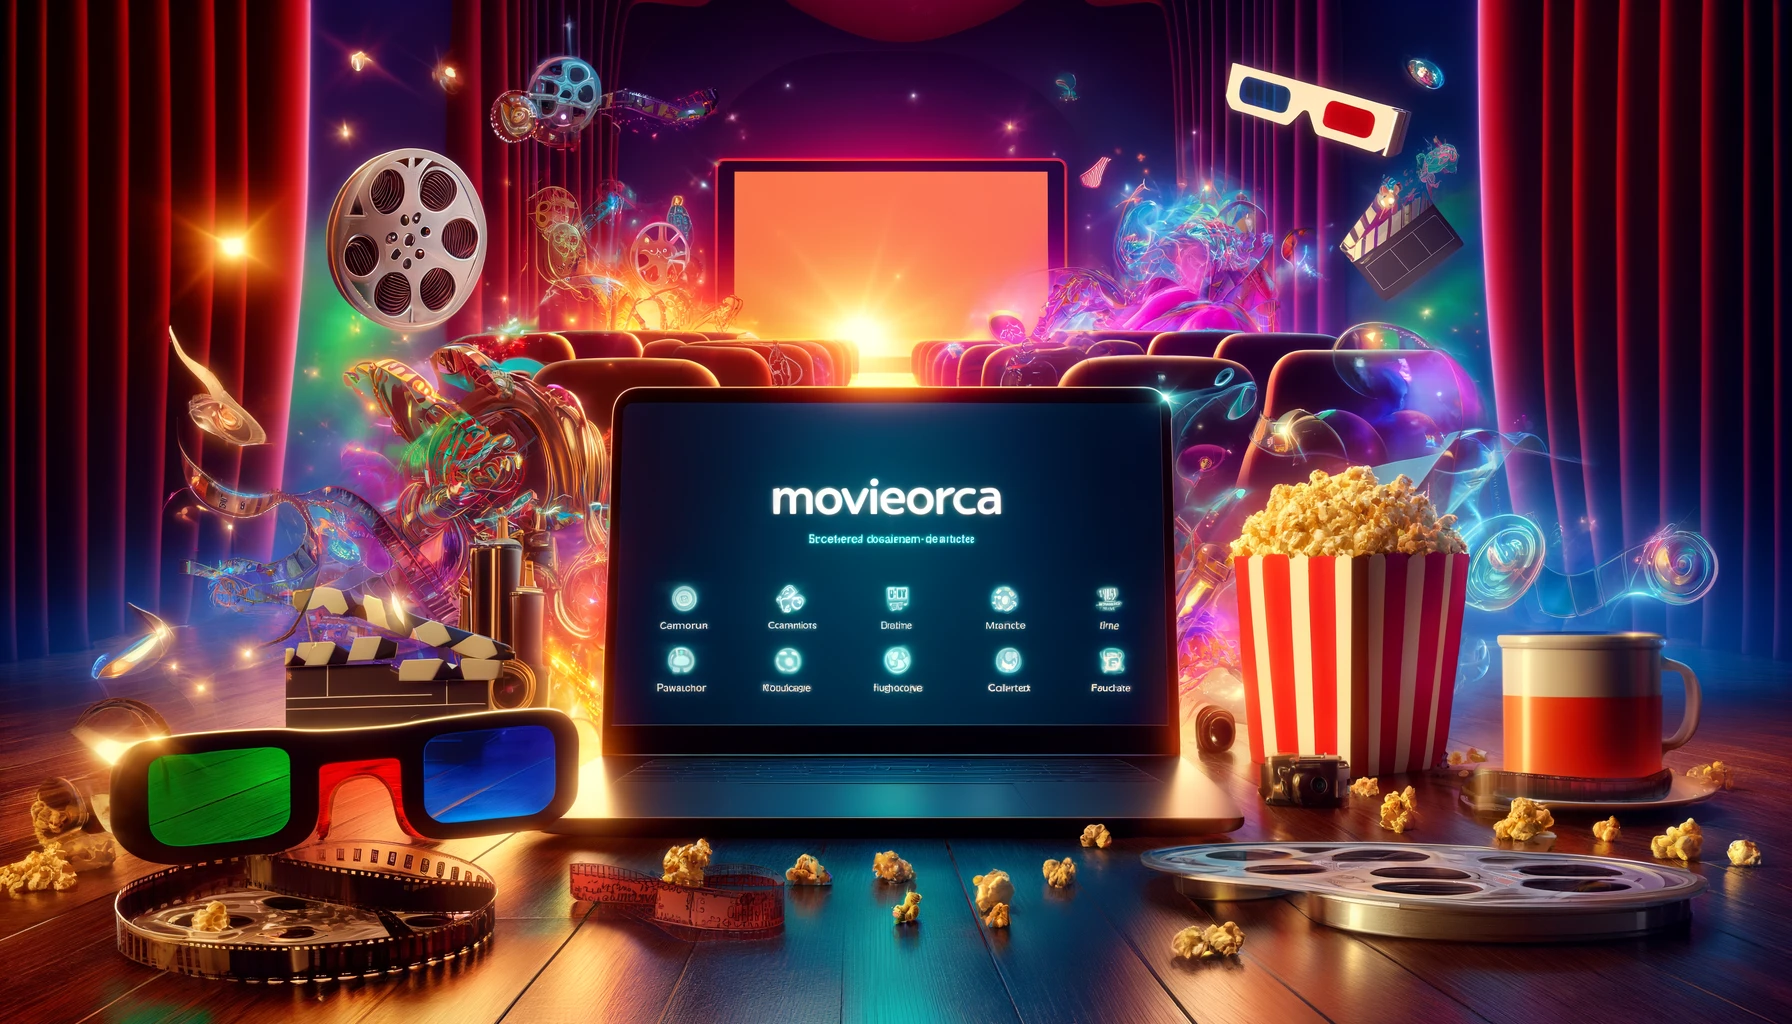 MovieOrca is a revolutionary platform for movie enthusiasts. It offers a wide array of films from various genres and regions. Whether you're into classic cinema or the latest blockbusters, MovieOrca has something for everyone. Its user-friendly interface and vast library make it a top choice for movie lovers. How MovieOrca Works MovieOrca operates seamlessly. Users can browse through an extensive collection of movies, categorized by genre, release year, and popularity. The platform's advanced search functionality allows users to find their favorite films quickly. MovieOrca’s recommendation engine also suggests movies based on viewing history, ensuring a personalized experience. Features and Benefits of Using MovieOrca One of the standout features of MovieOrca is that it doesn't require users to sign up or pay subscription fees. This accessibility makes it a go-to for many who want to enjoy movies without any commitment. MovieOrca’s Method of Downloading MovieOrca offers a straightforward downloading process. Users can download movies directly to their devices for offline viewing. This feature is perfect for those who want to watch movies on the go without relying on an internet connection. MovieOrca’s Alternatives While MovieOrca is a fantastic platform, there are alternatives available. Some of the popular ones include Netflix, Amazon Prime, and Hulu. Each offers unique features, but MovieOrca stands out due to its free access and vast movie collection. Top Movies on MovieOrca MovieOrca hosts a diverse selection of top-rated movies. From Hollywood hits to indie gems, there’s something for every taste. The platform updates its library regularly, ensuring that users have access to the latest releases as well as timeless classics. User Reviews and Ratings User reviews and ratings are crucial for any movie platform, and MovieOrca excels in this area. Users can rate and review movies, providing valuable feedback for others. This feature helps in creating a community of movie enthusiasts who share their insights and recommendations. Exclusive Interviews with Filmmakers MovieOrca also features exclusive interviews with filmmakers. These interviews provide a behind-the-scenes look at the movie-making process, offering unique insights and stories from directors, actors, and other industry professionals. Future Plans for MovieOrca Looking ahead, MovieOrca plans to expand its library and introduce new features. The platform aims to enhance user experience by incorporating more interactive elements and exclusive content. MovieOrca is also exploring partnerships with film festivals and independent filmmakers to bring more diverse content to its users. Conclusion In conclusion, MovieOrca is a remarkable platform for movie enthusiasts. Its extensive library, user-friendly interface, and unique features make it a standout choice for watching movies. With no subscription fees and easy access to a wide range of films, MovieOrca offers an unparalleled movie-watching experience. Keep an eye out for future updates and expansions from this innovative platform.